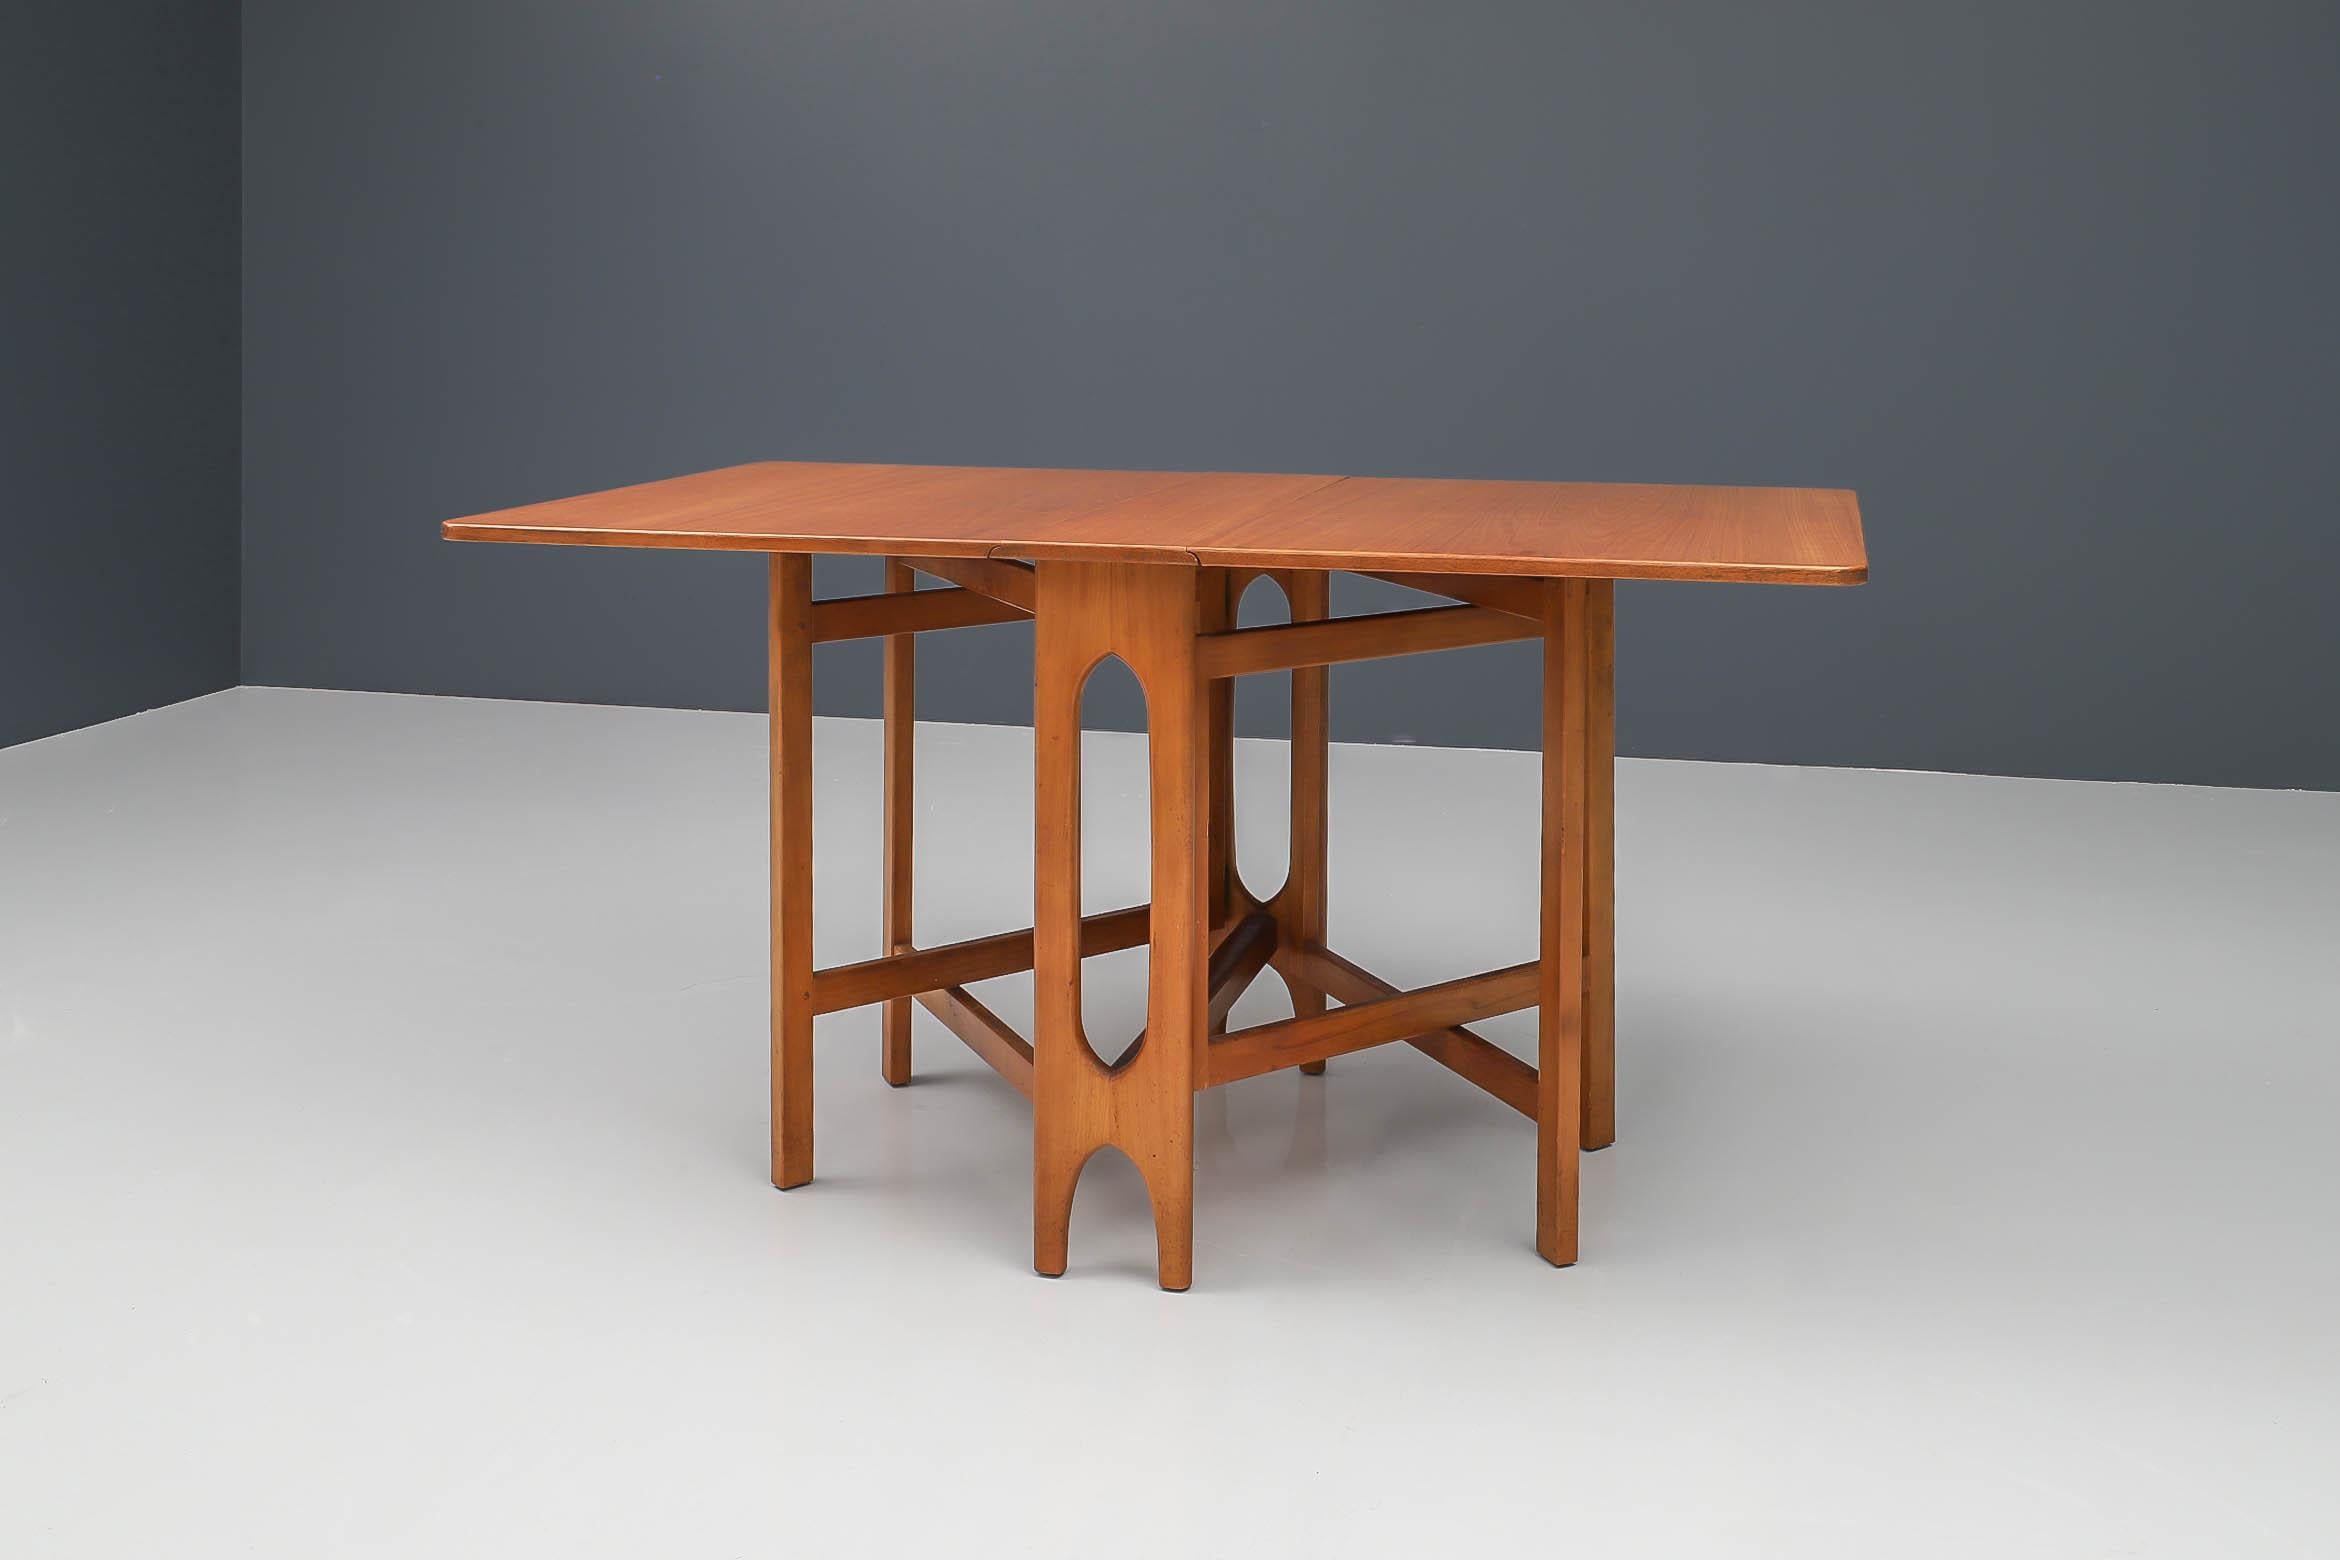 Clever dining table with interesting base that folds out to let the drop-leaves rest on. Nice geometrical shapes and made with a lot of care and precision. Very practical design and perfectly suitable for smaller houses in larger city's. The colour